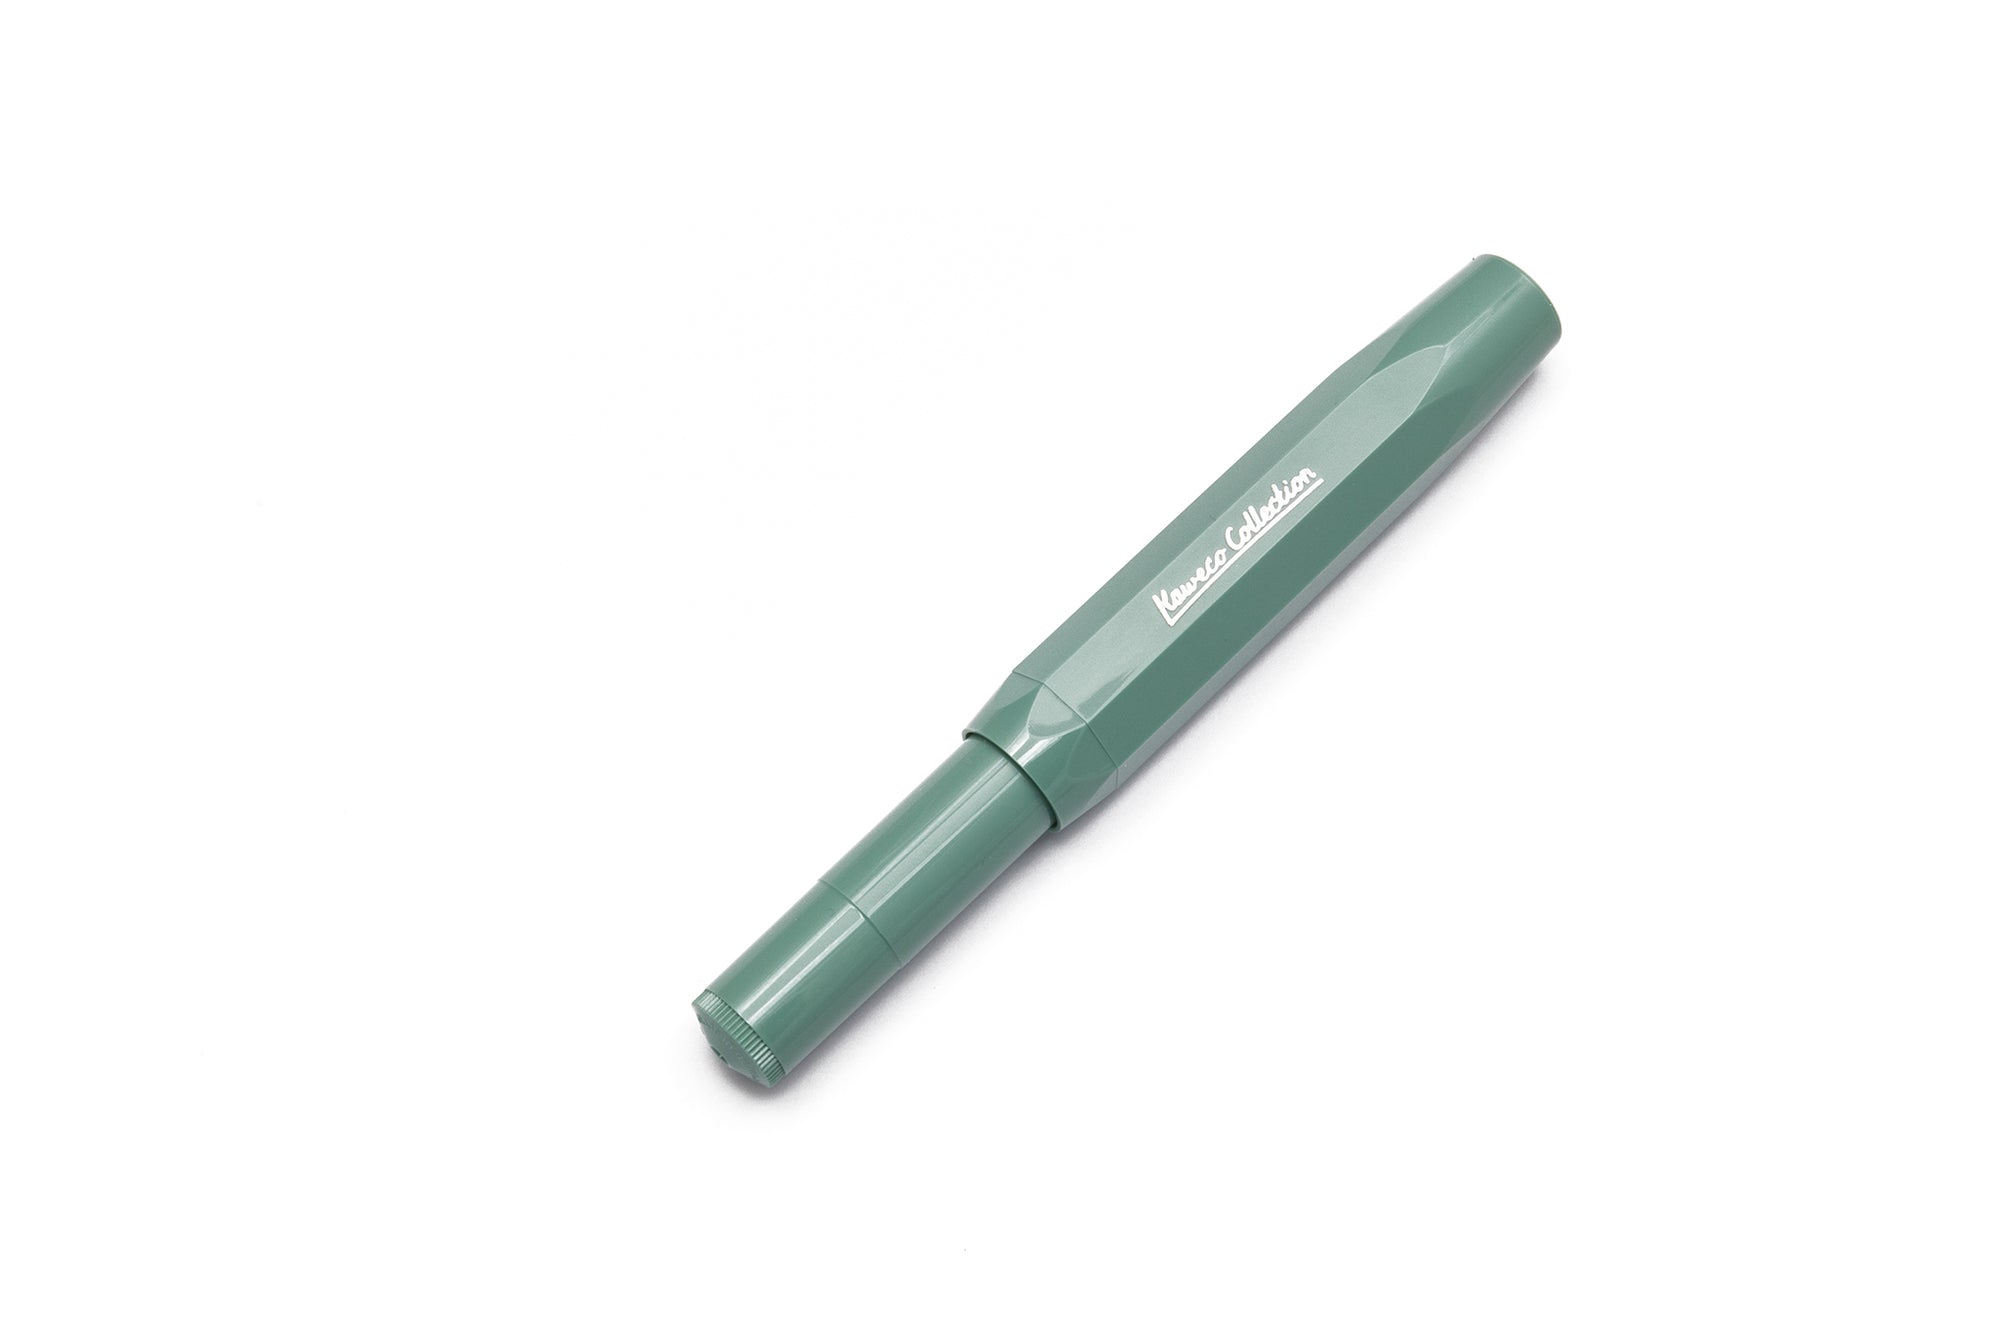 Kaweco Sport Collection Fountain Pen Toyama Teal 2023 Limited Edition